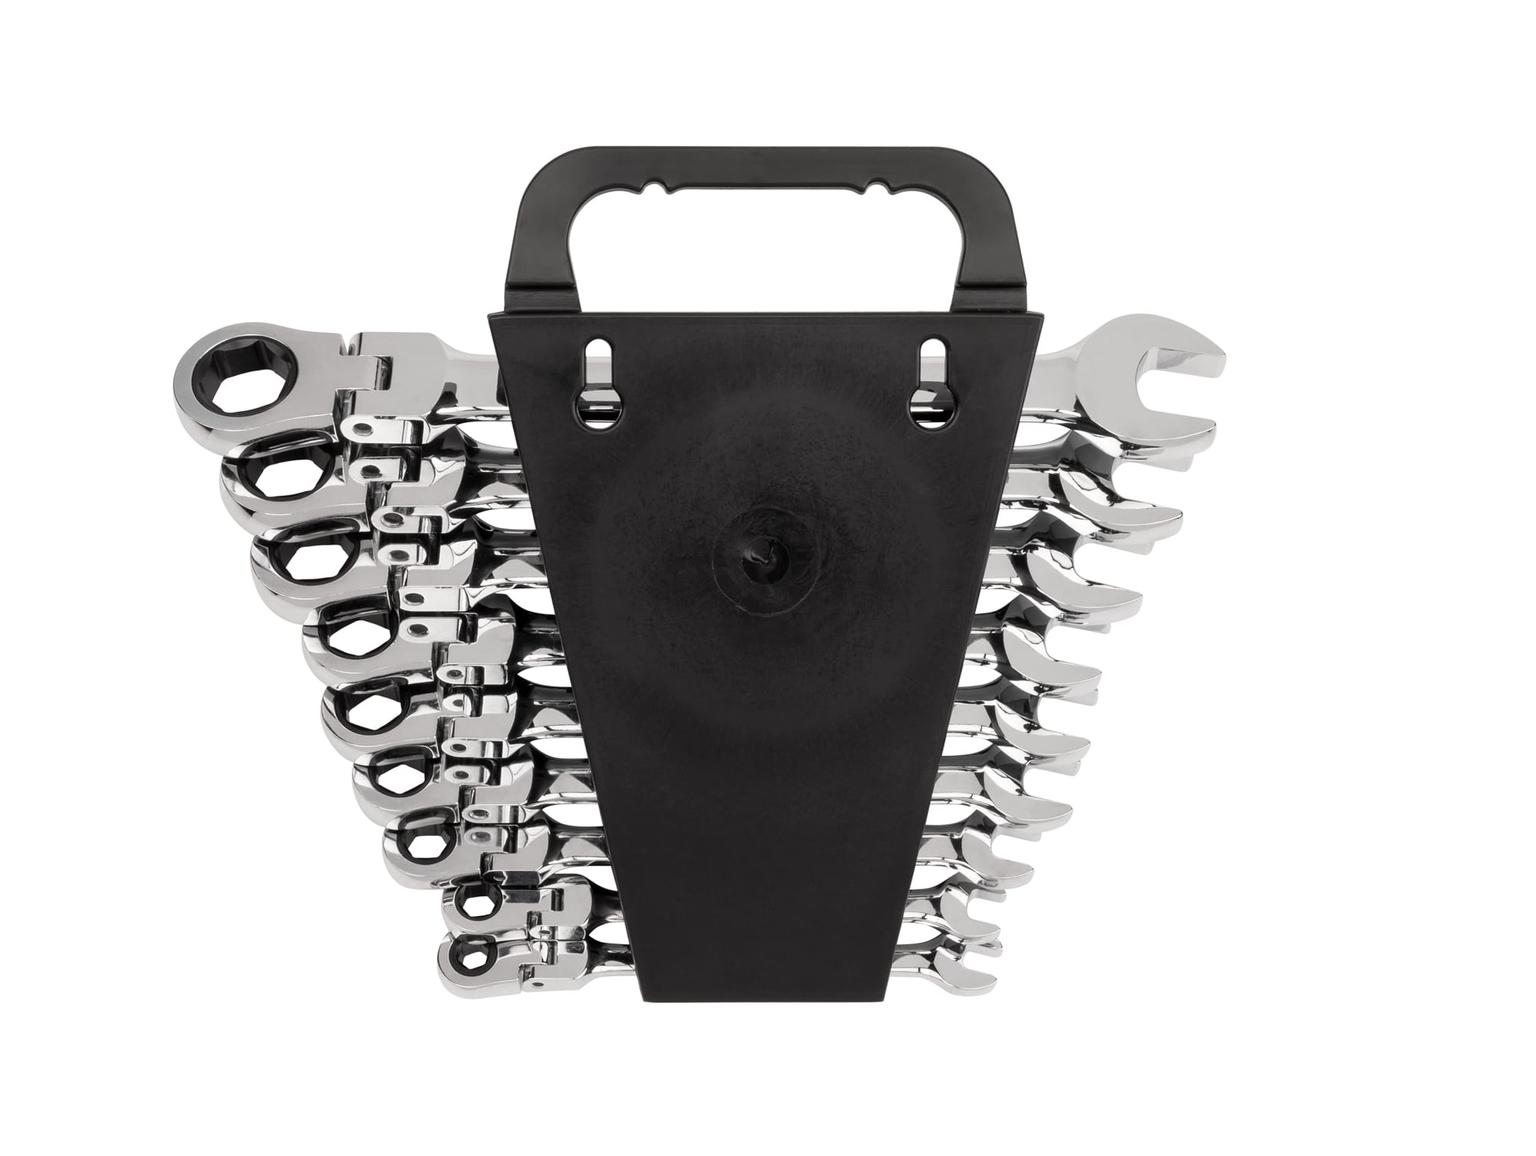 TEKTON WRN57067-T Flex Ratcheting Combination Wrench Set with Holder, 9-Piece (1/4-3/4 in.)